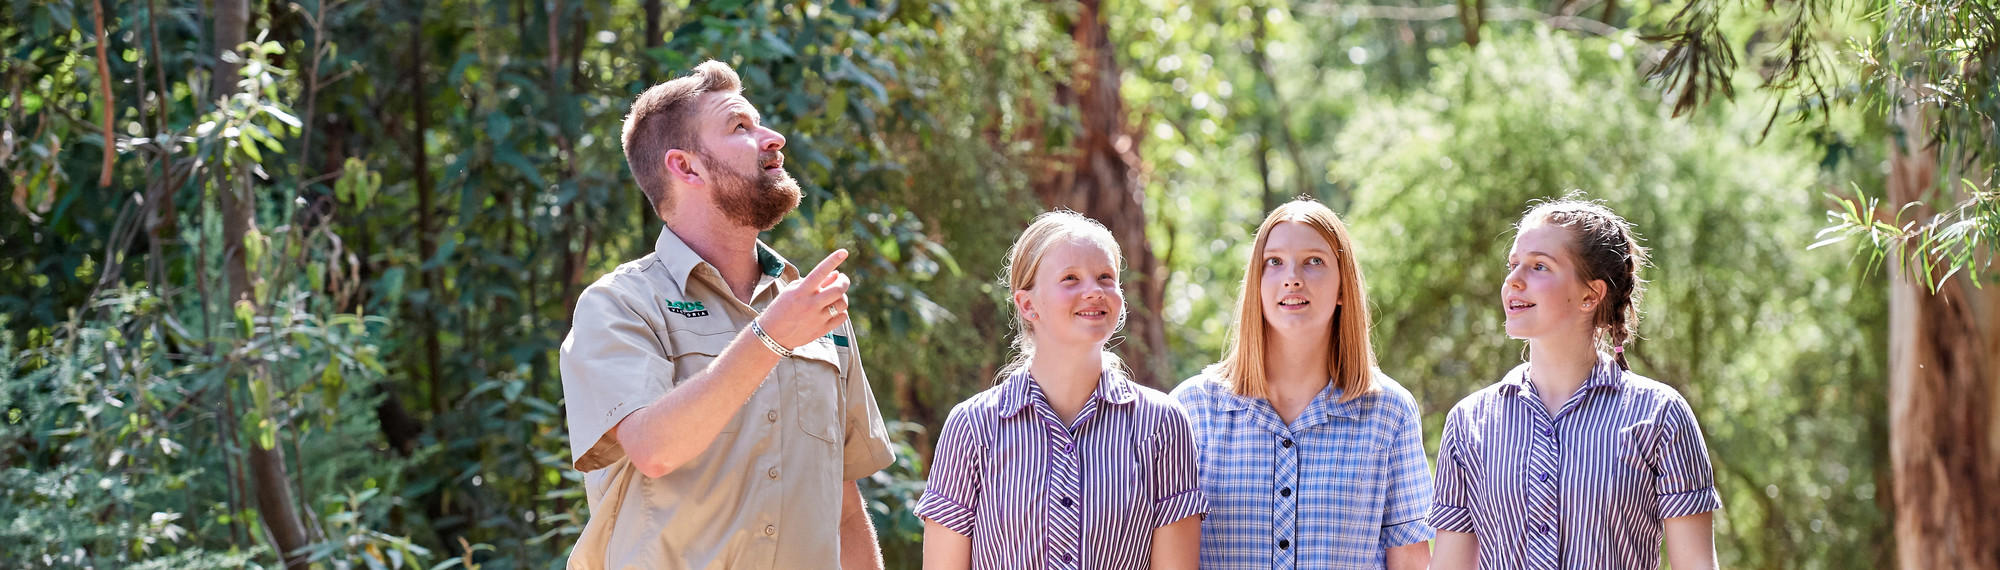 A zoo staff member points up into the bushland while talking to three school students, dressed in school uniforms